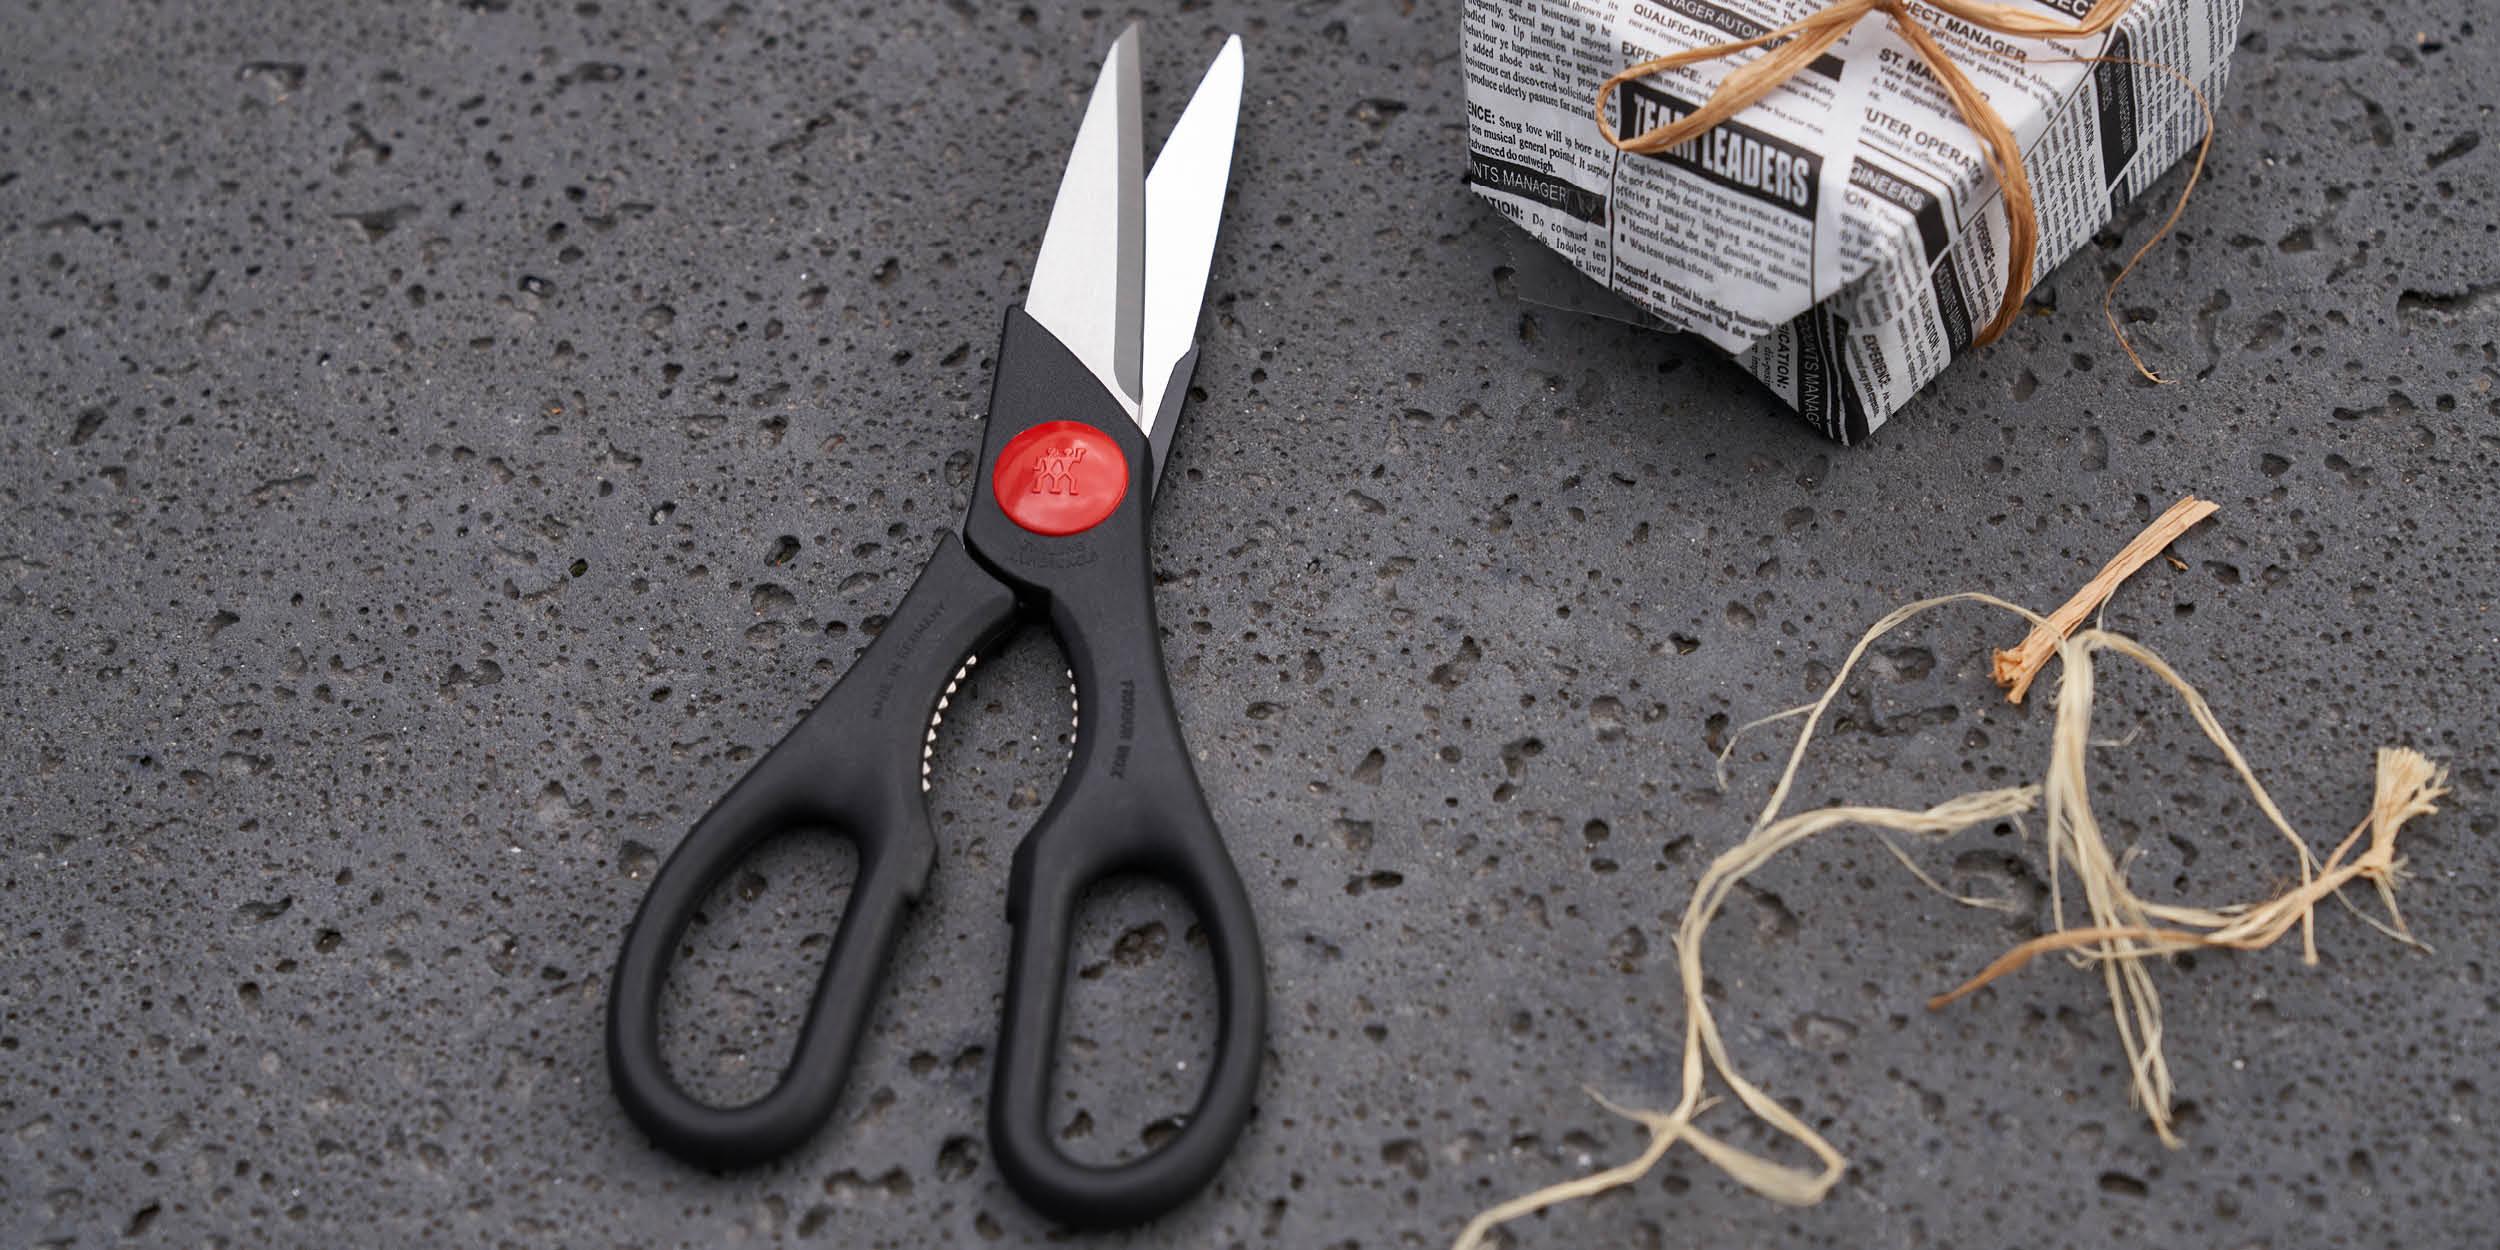 Zwilling Forged Multi-Purpose Kitchen Shears - Red